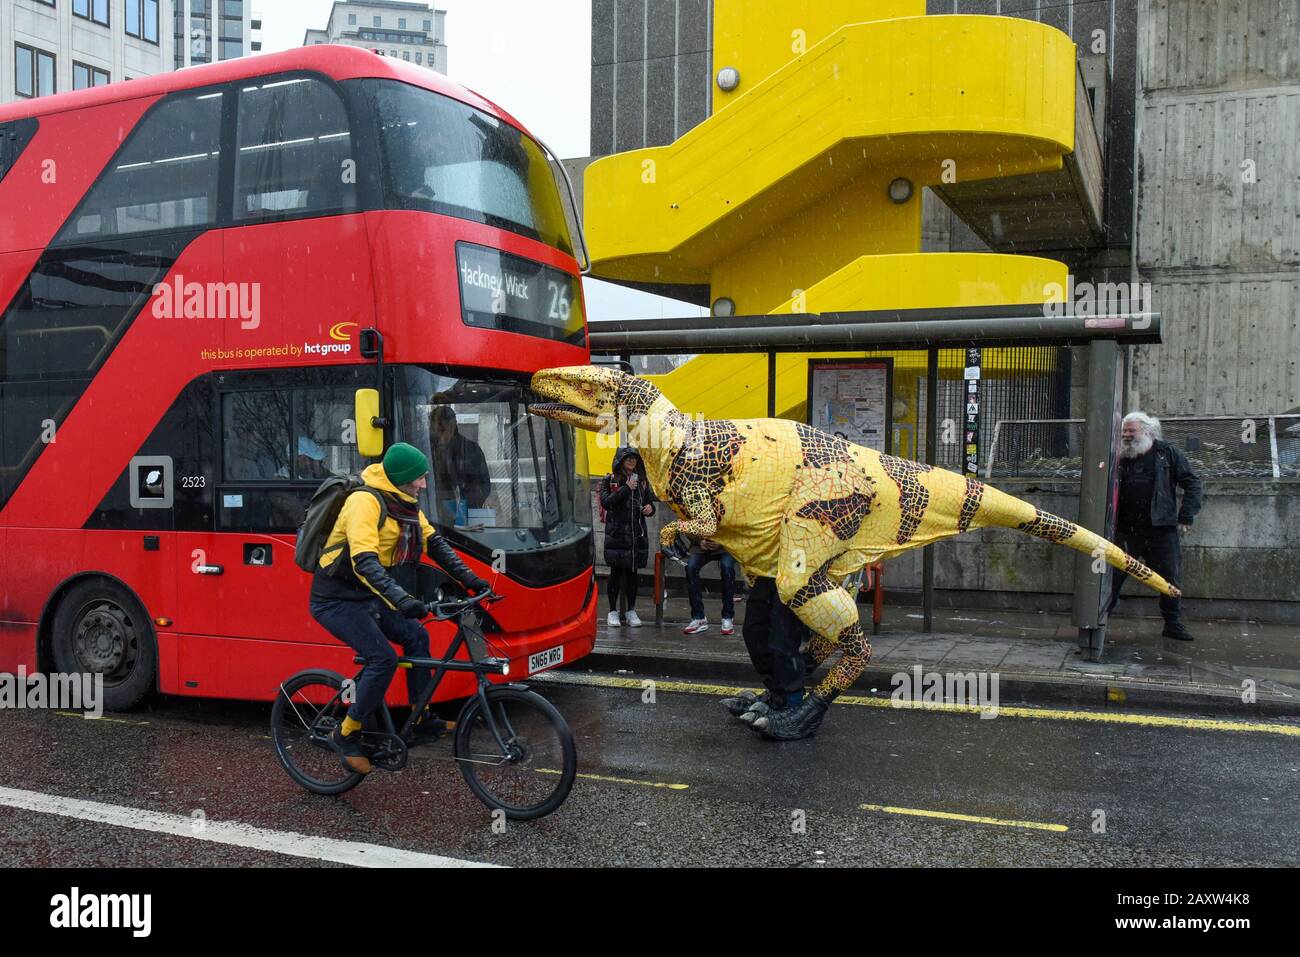 London, UK. 13 February 2020. A Fukui raptor attempts to board a double  decker bus. The raptor is from Erth's Dinosaur Zoo, one of the acts forming  part of Imagine Children's Festival